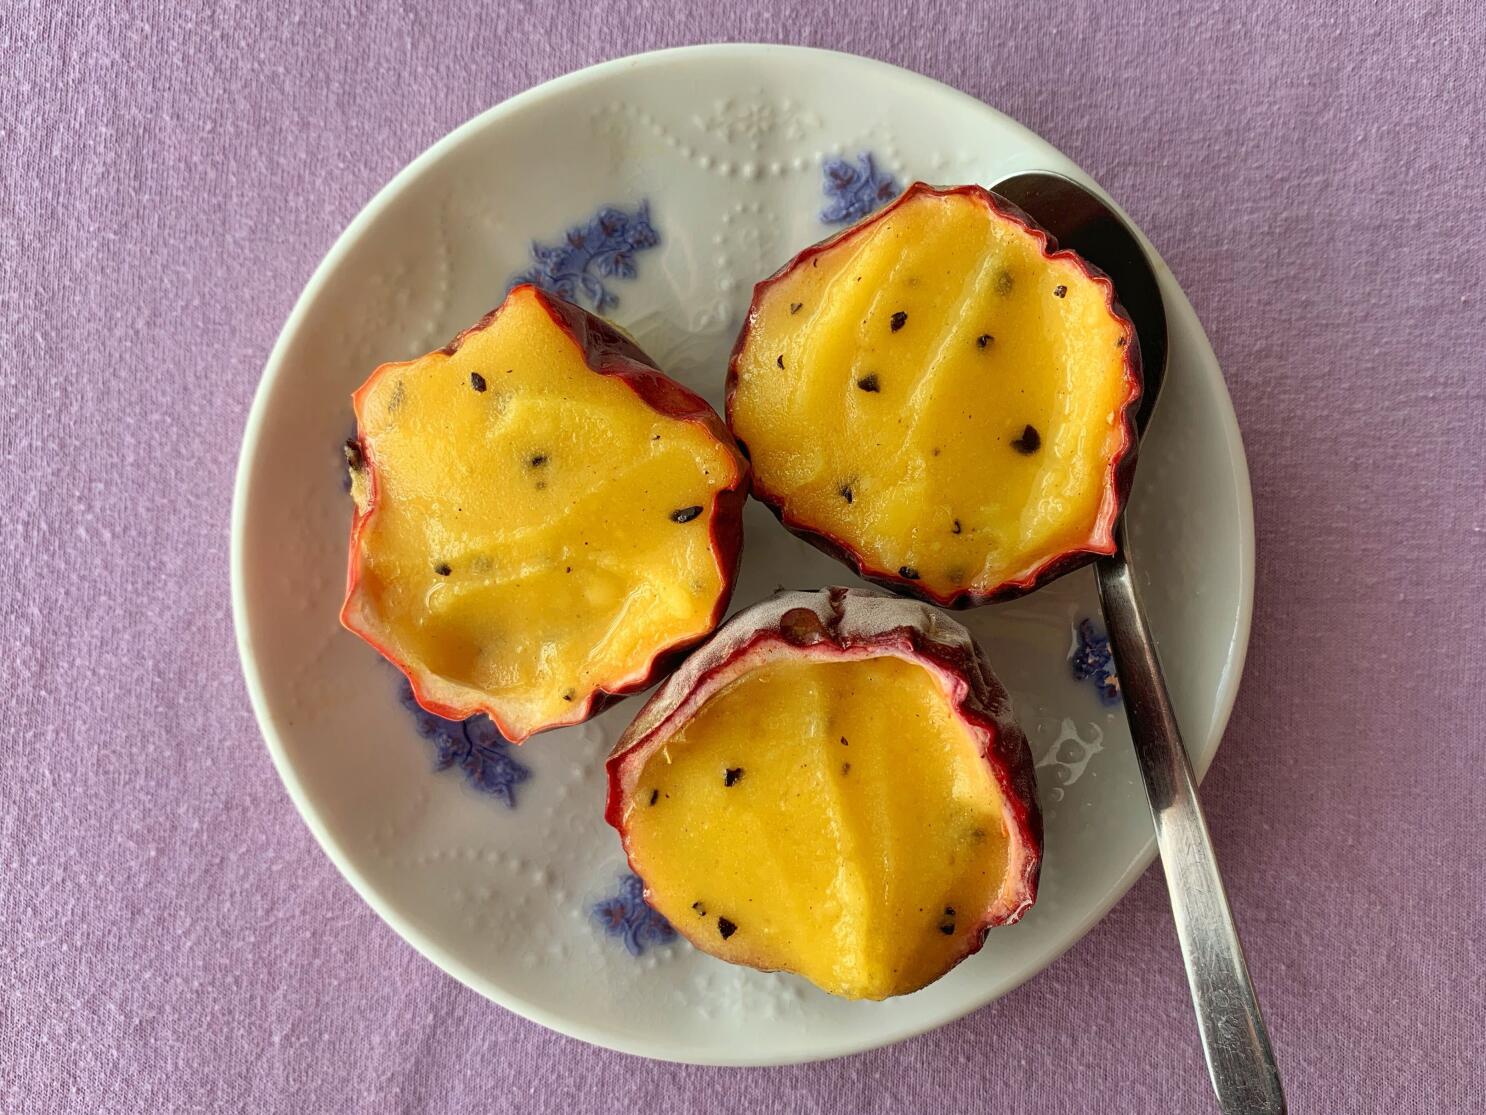 In Season: Passion Fruit  Food Network Healthy Eats: Recipes